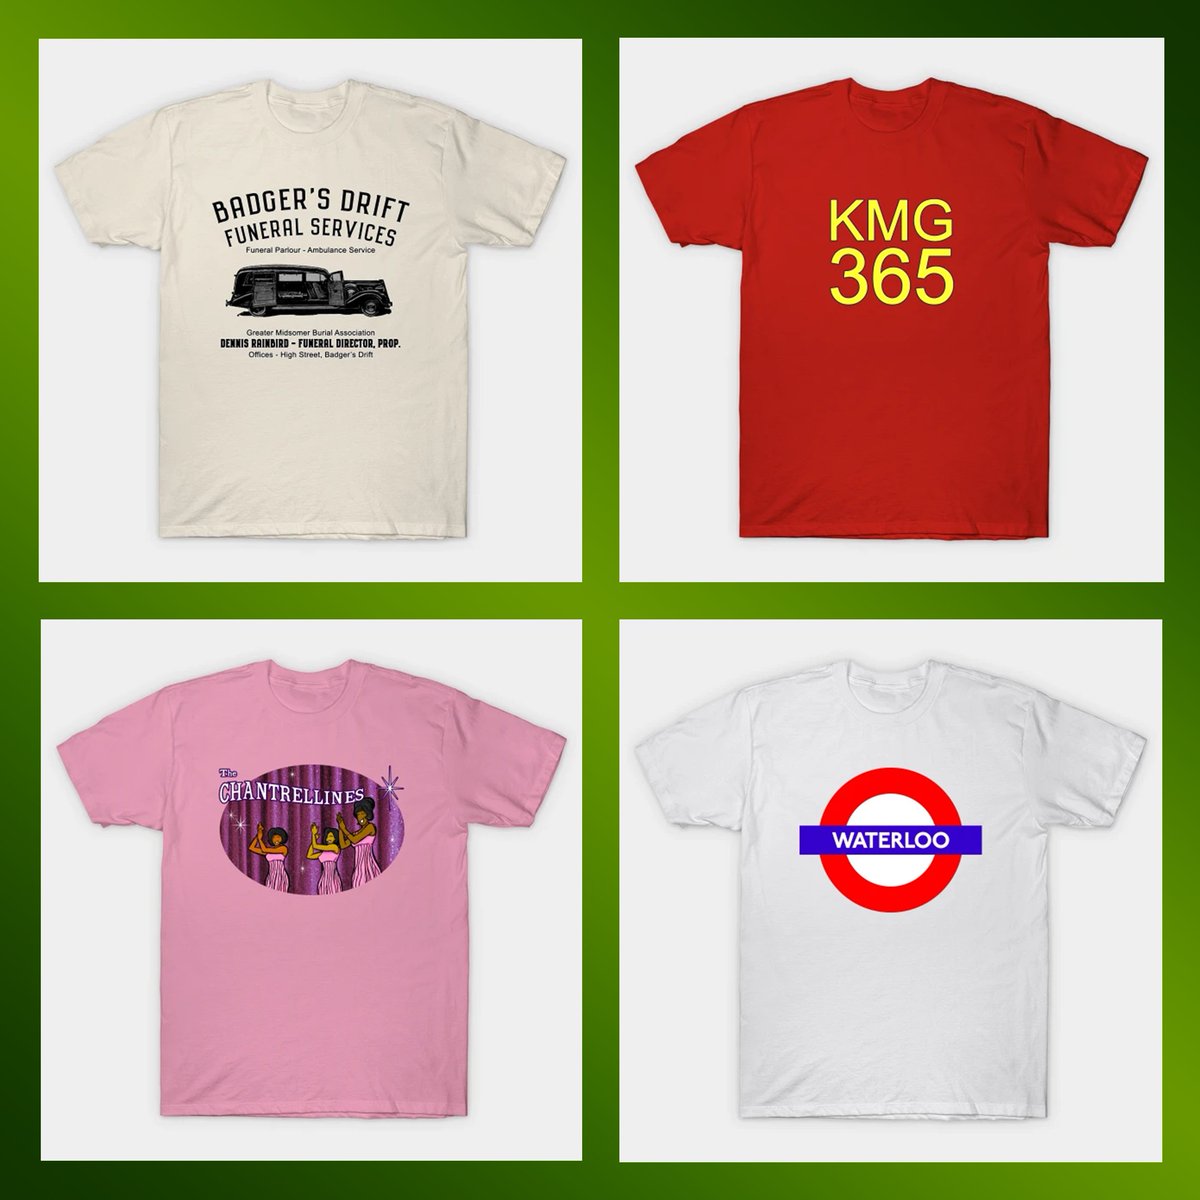 Check Out Our Great Selection Of Tv & Movie Tee! #MidsomerMurders #BadgersDrift #Emergency #Squad51 #ThatThingYouDo #TheChantrellines #LetItBe #GetBack #Beatles #TheBeatles #Liverpool #London #LosAngeles #Erie teepublic.com/user/vandalay-…